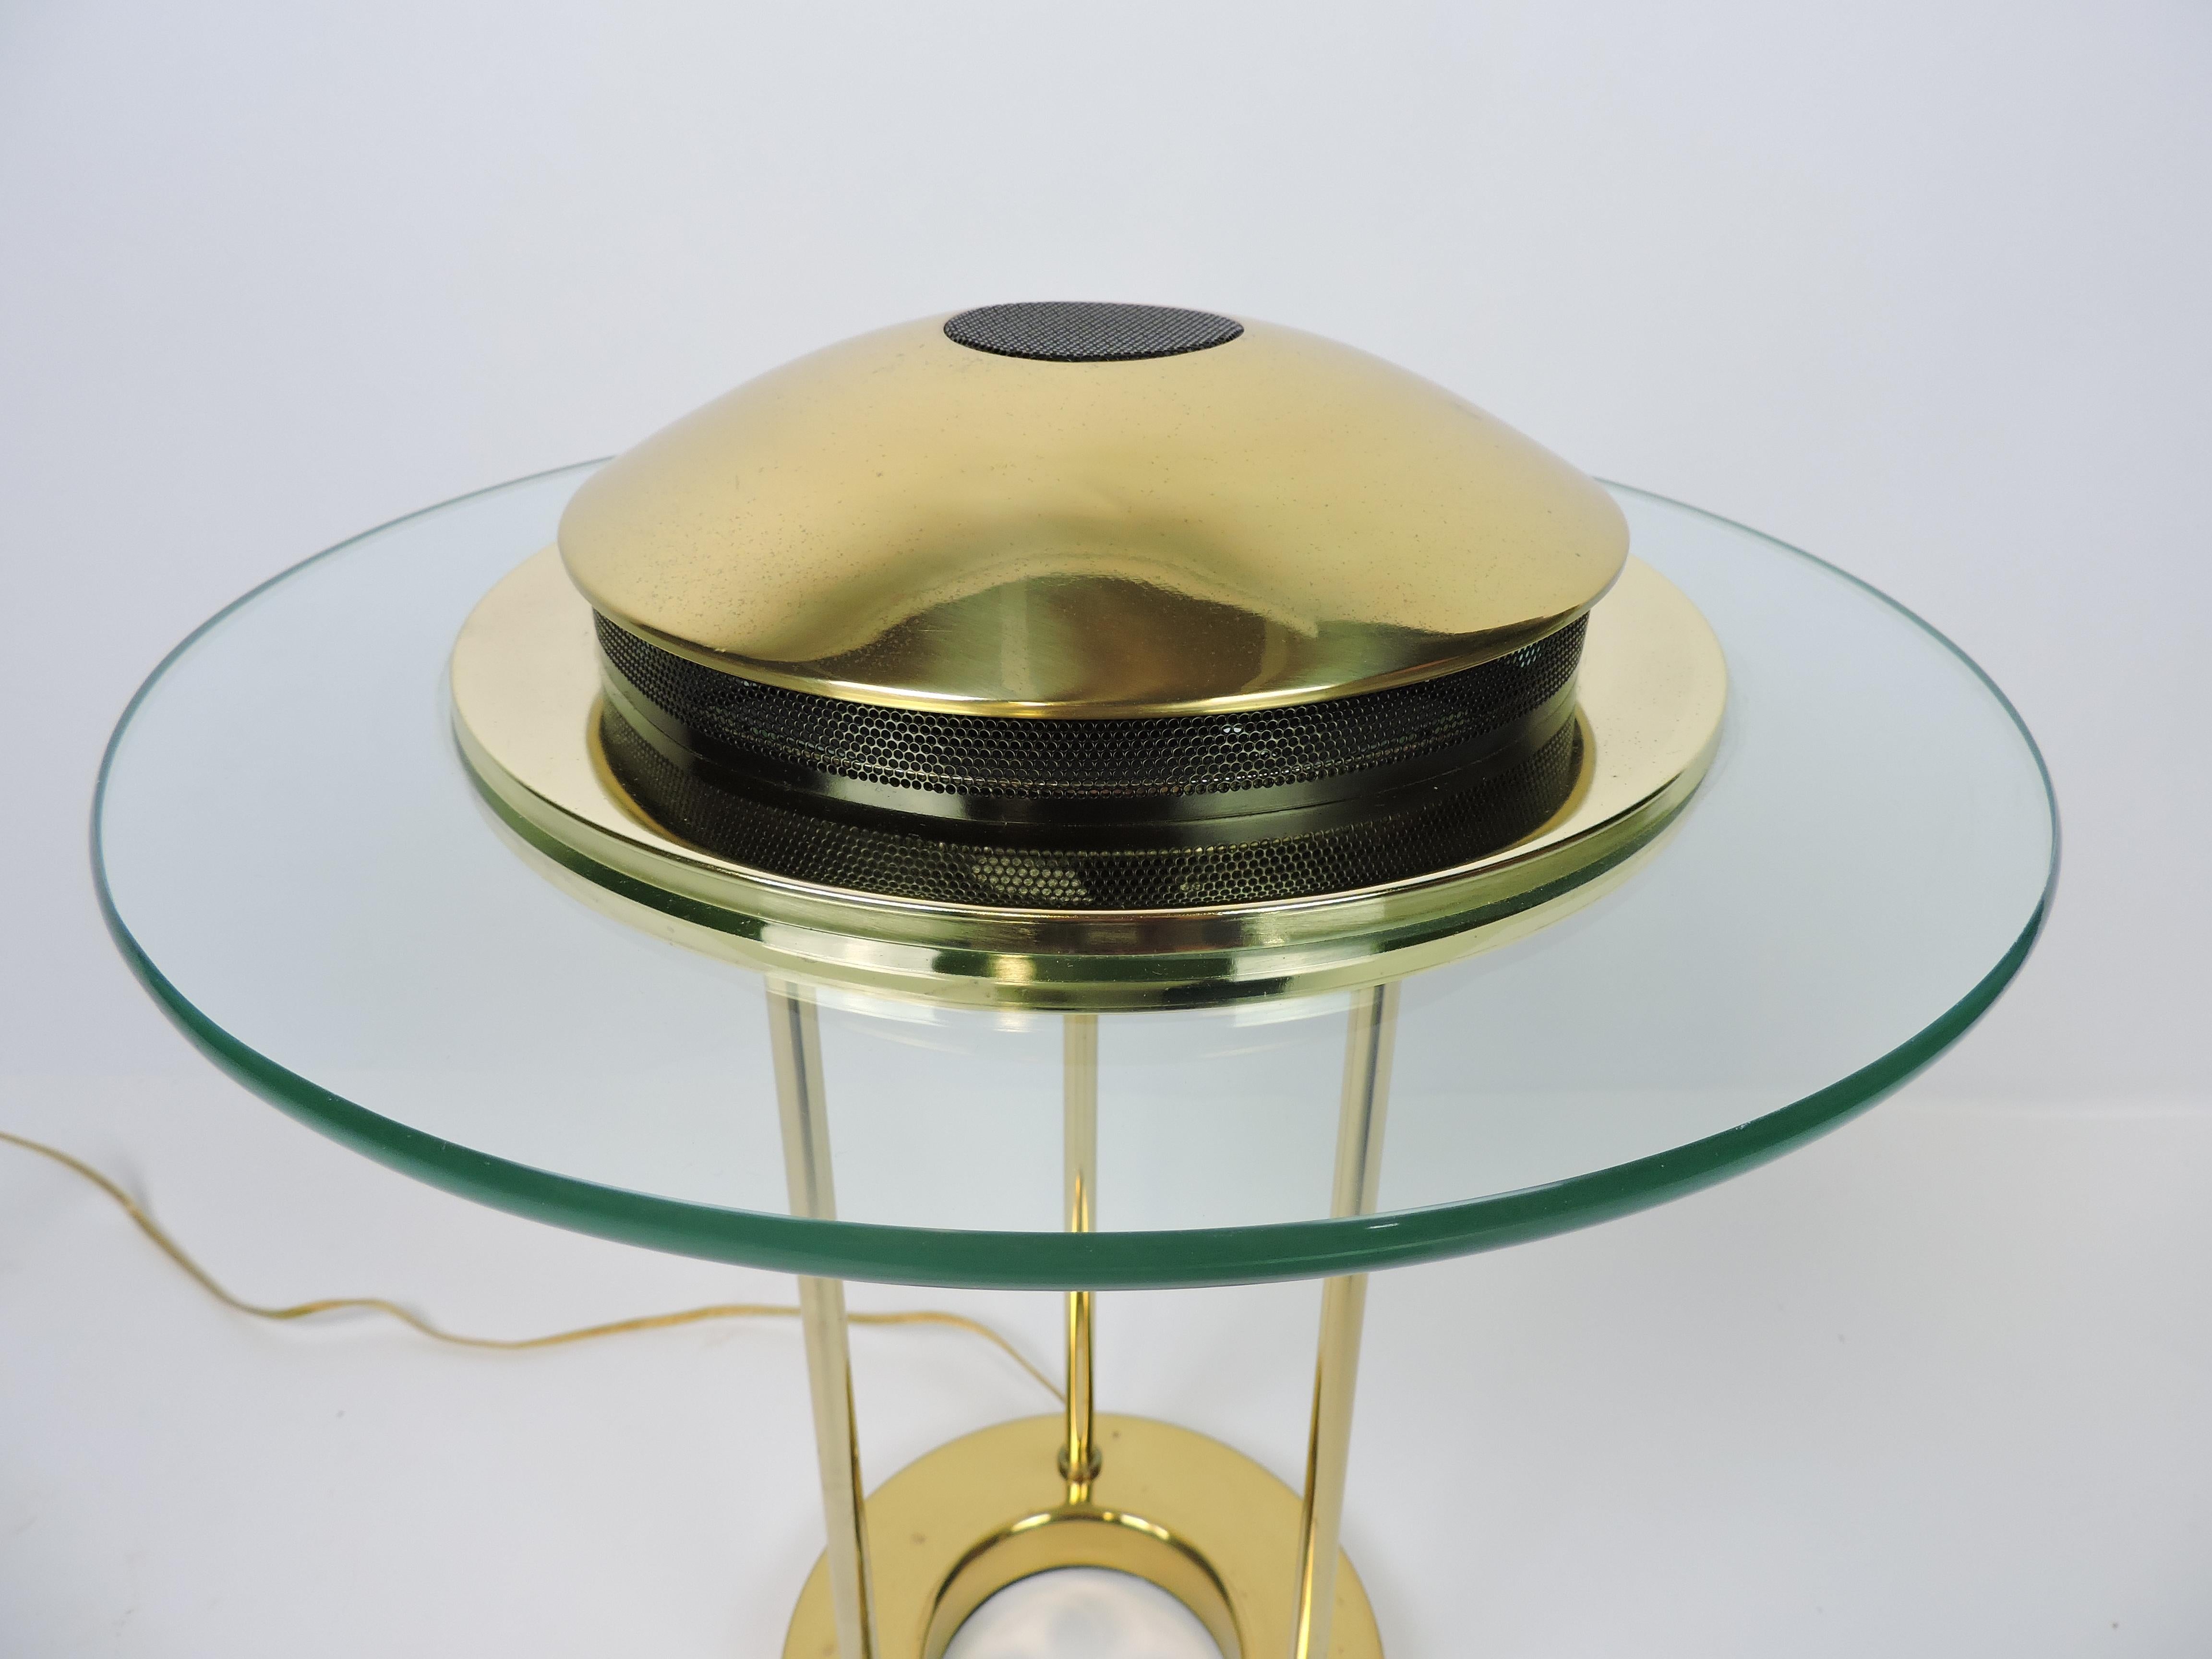 Very cool and iconic brass and glass Saturn desk lamp from the 1980s designed by Robert Sonneman for George Kovacs. This lamp has a round glass disc with a domed top that's supported by three columns on a circular base. It has an on/off dimmer